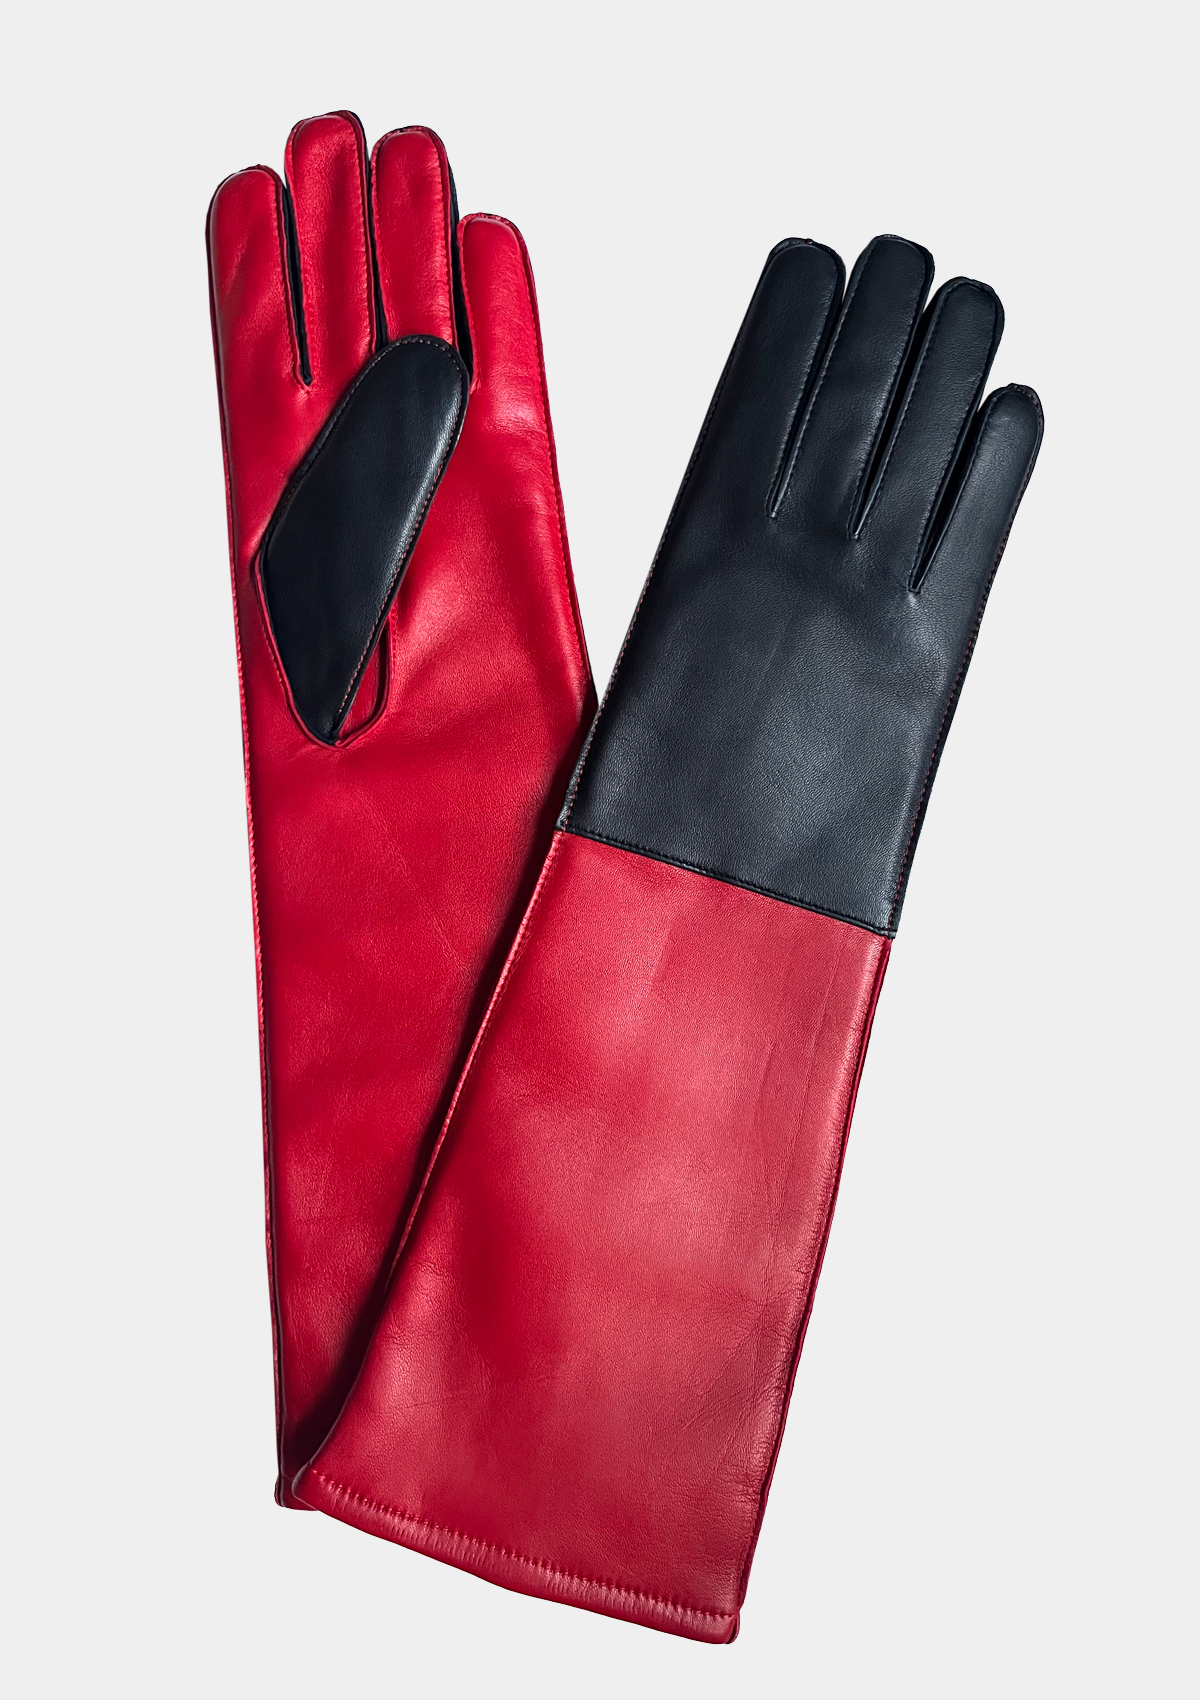 RED AND BLACK COLORBLOCK GLOVES